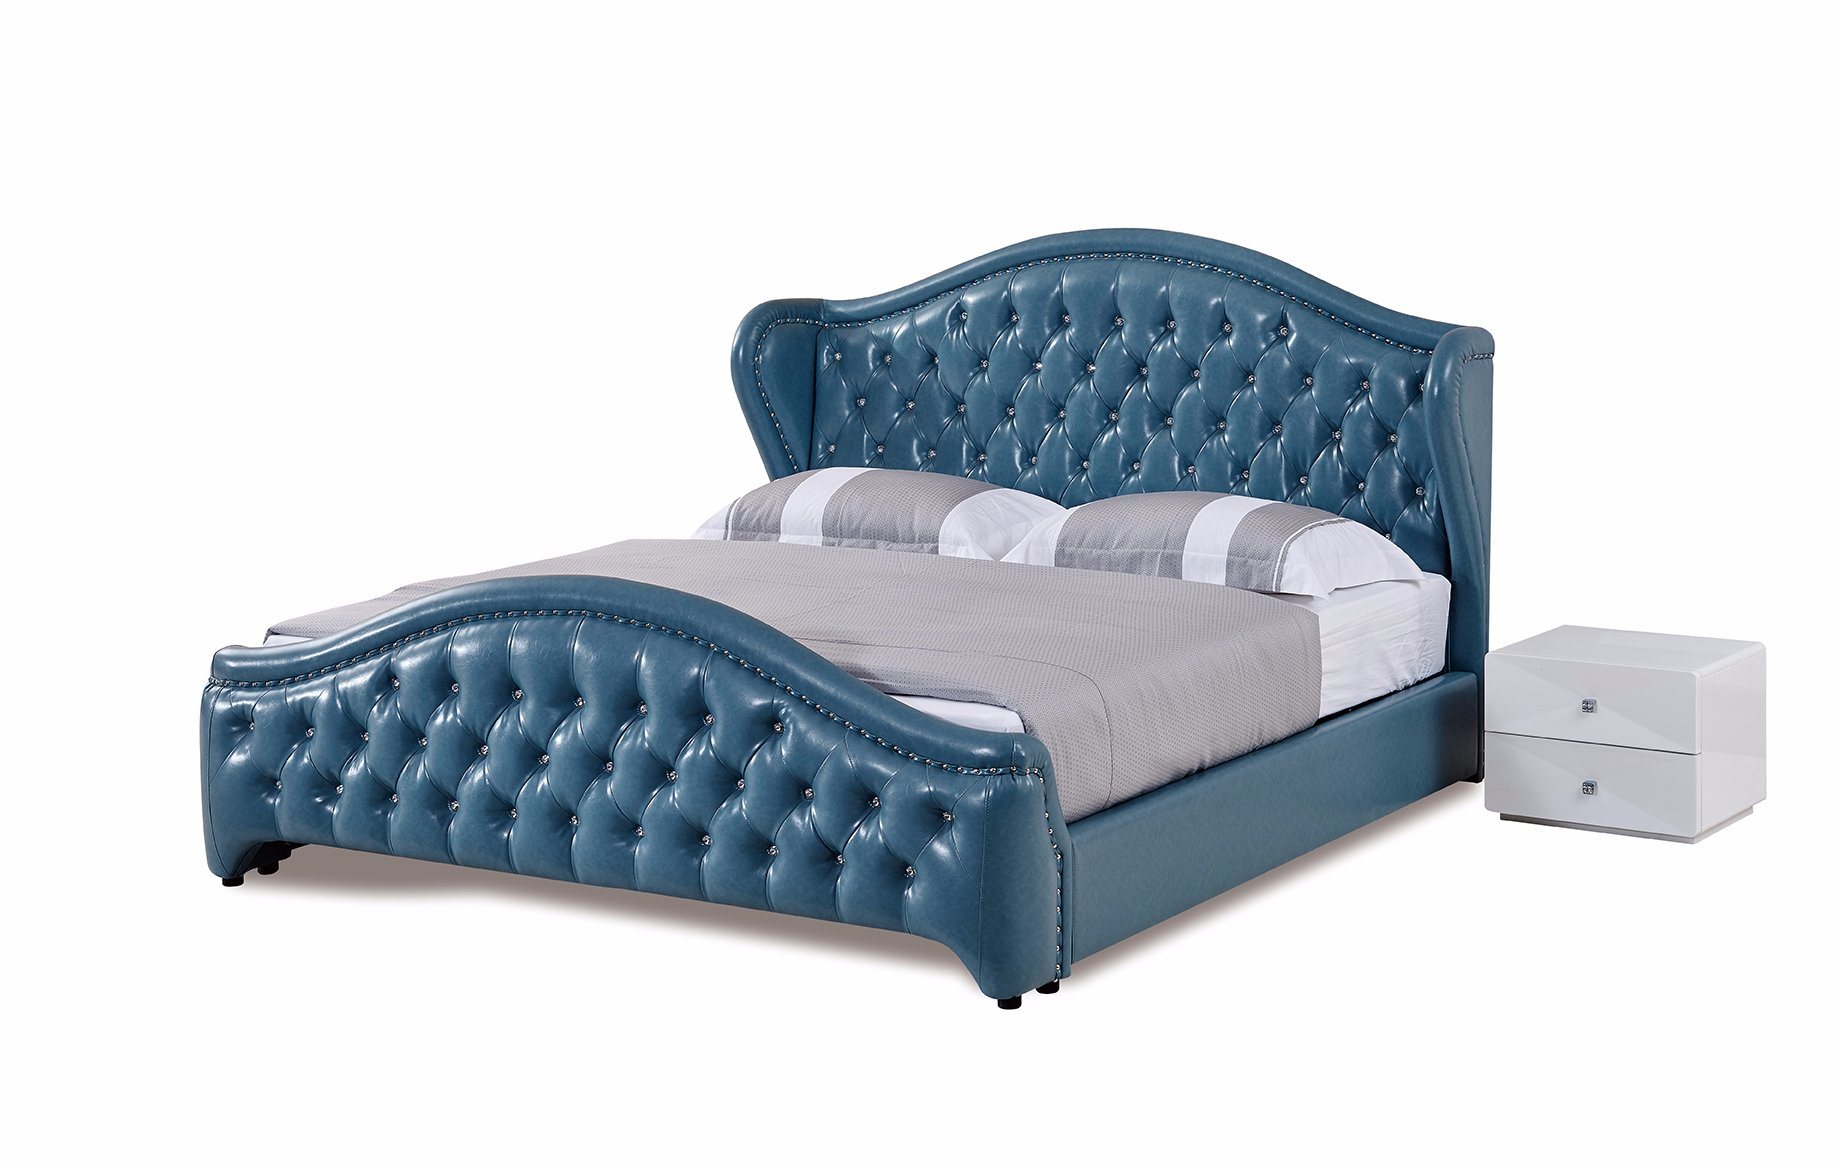 American Style Chesterfield Wingback Leather Bed